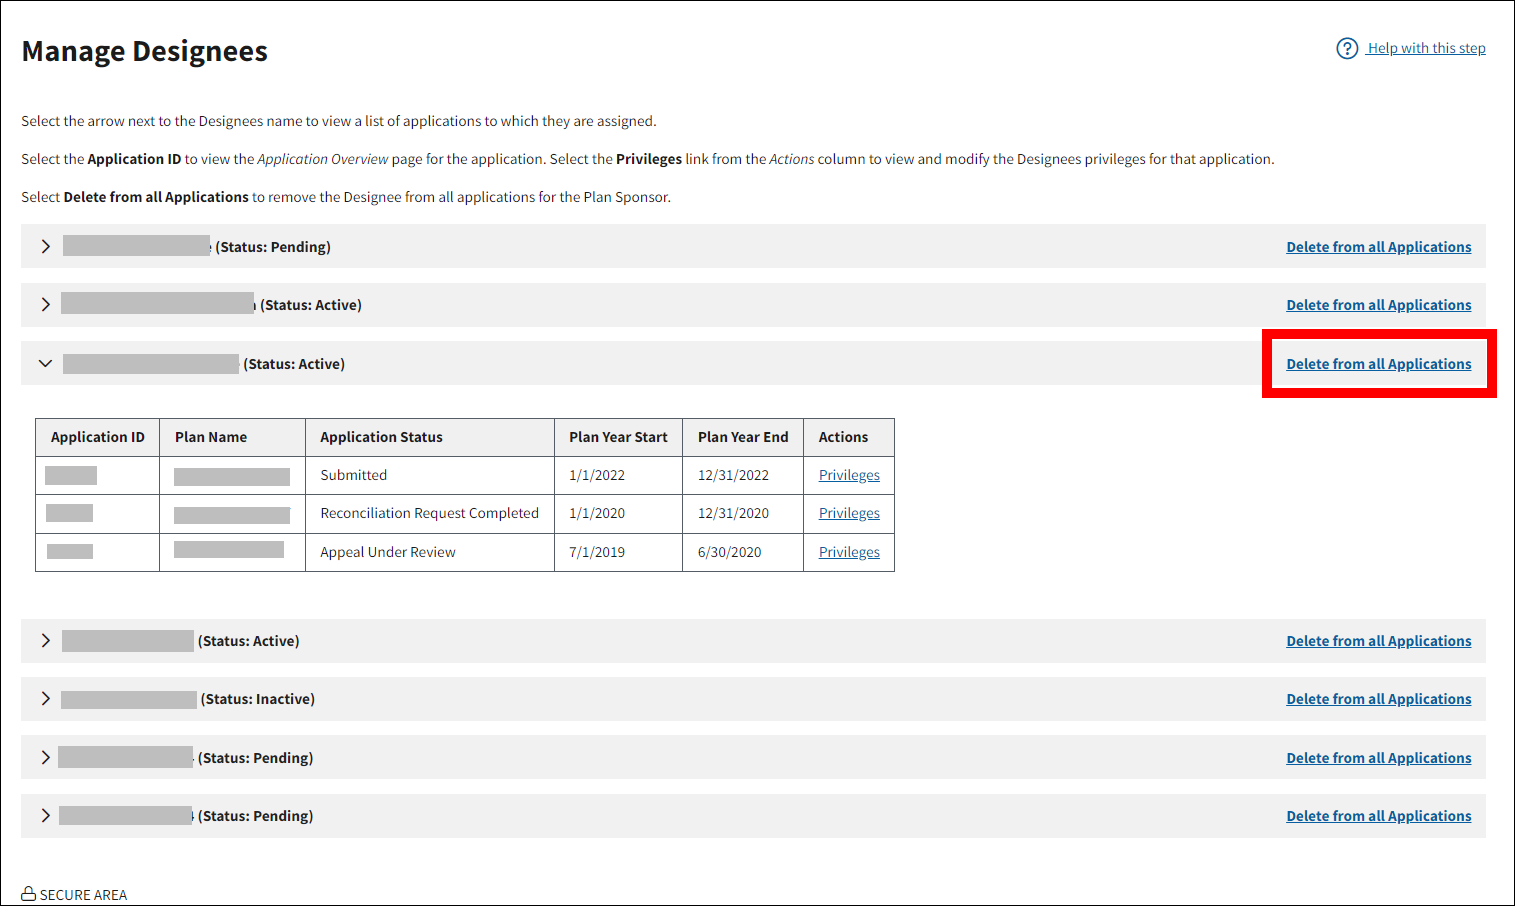 Manage Designees page with sample data. Delete from all Applications link is highlighted.